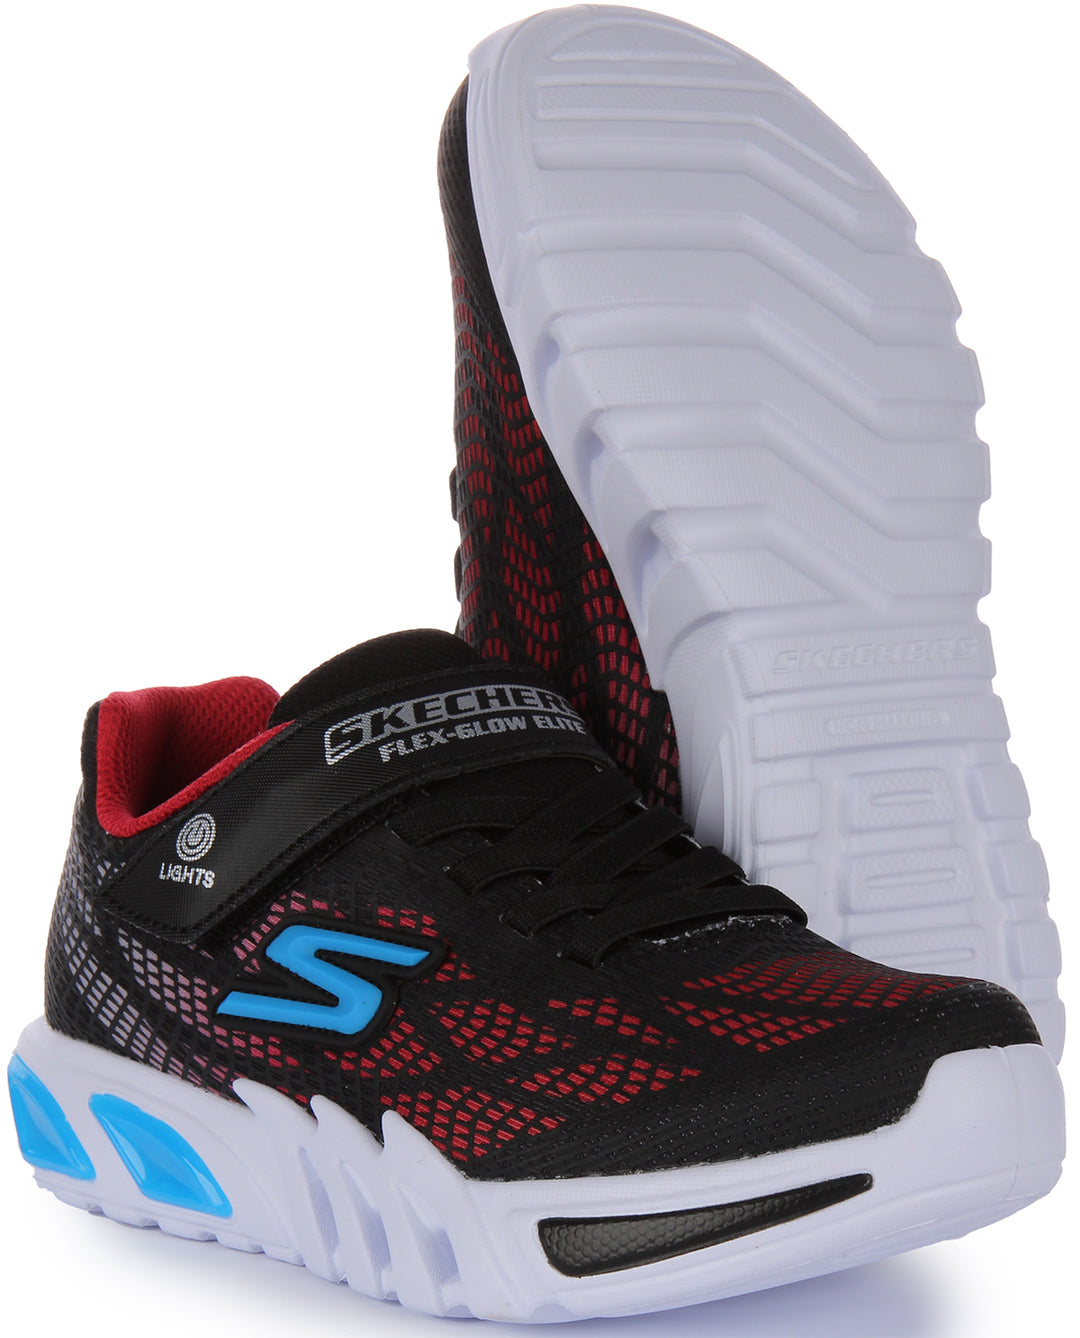 Flex Trainers Skechers Red 4feetshoes Black – In Kids Elite Light | Glow For Up